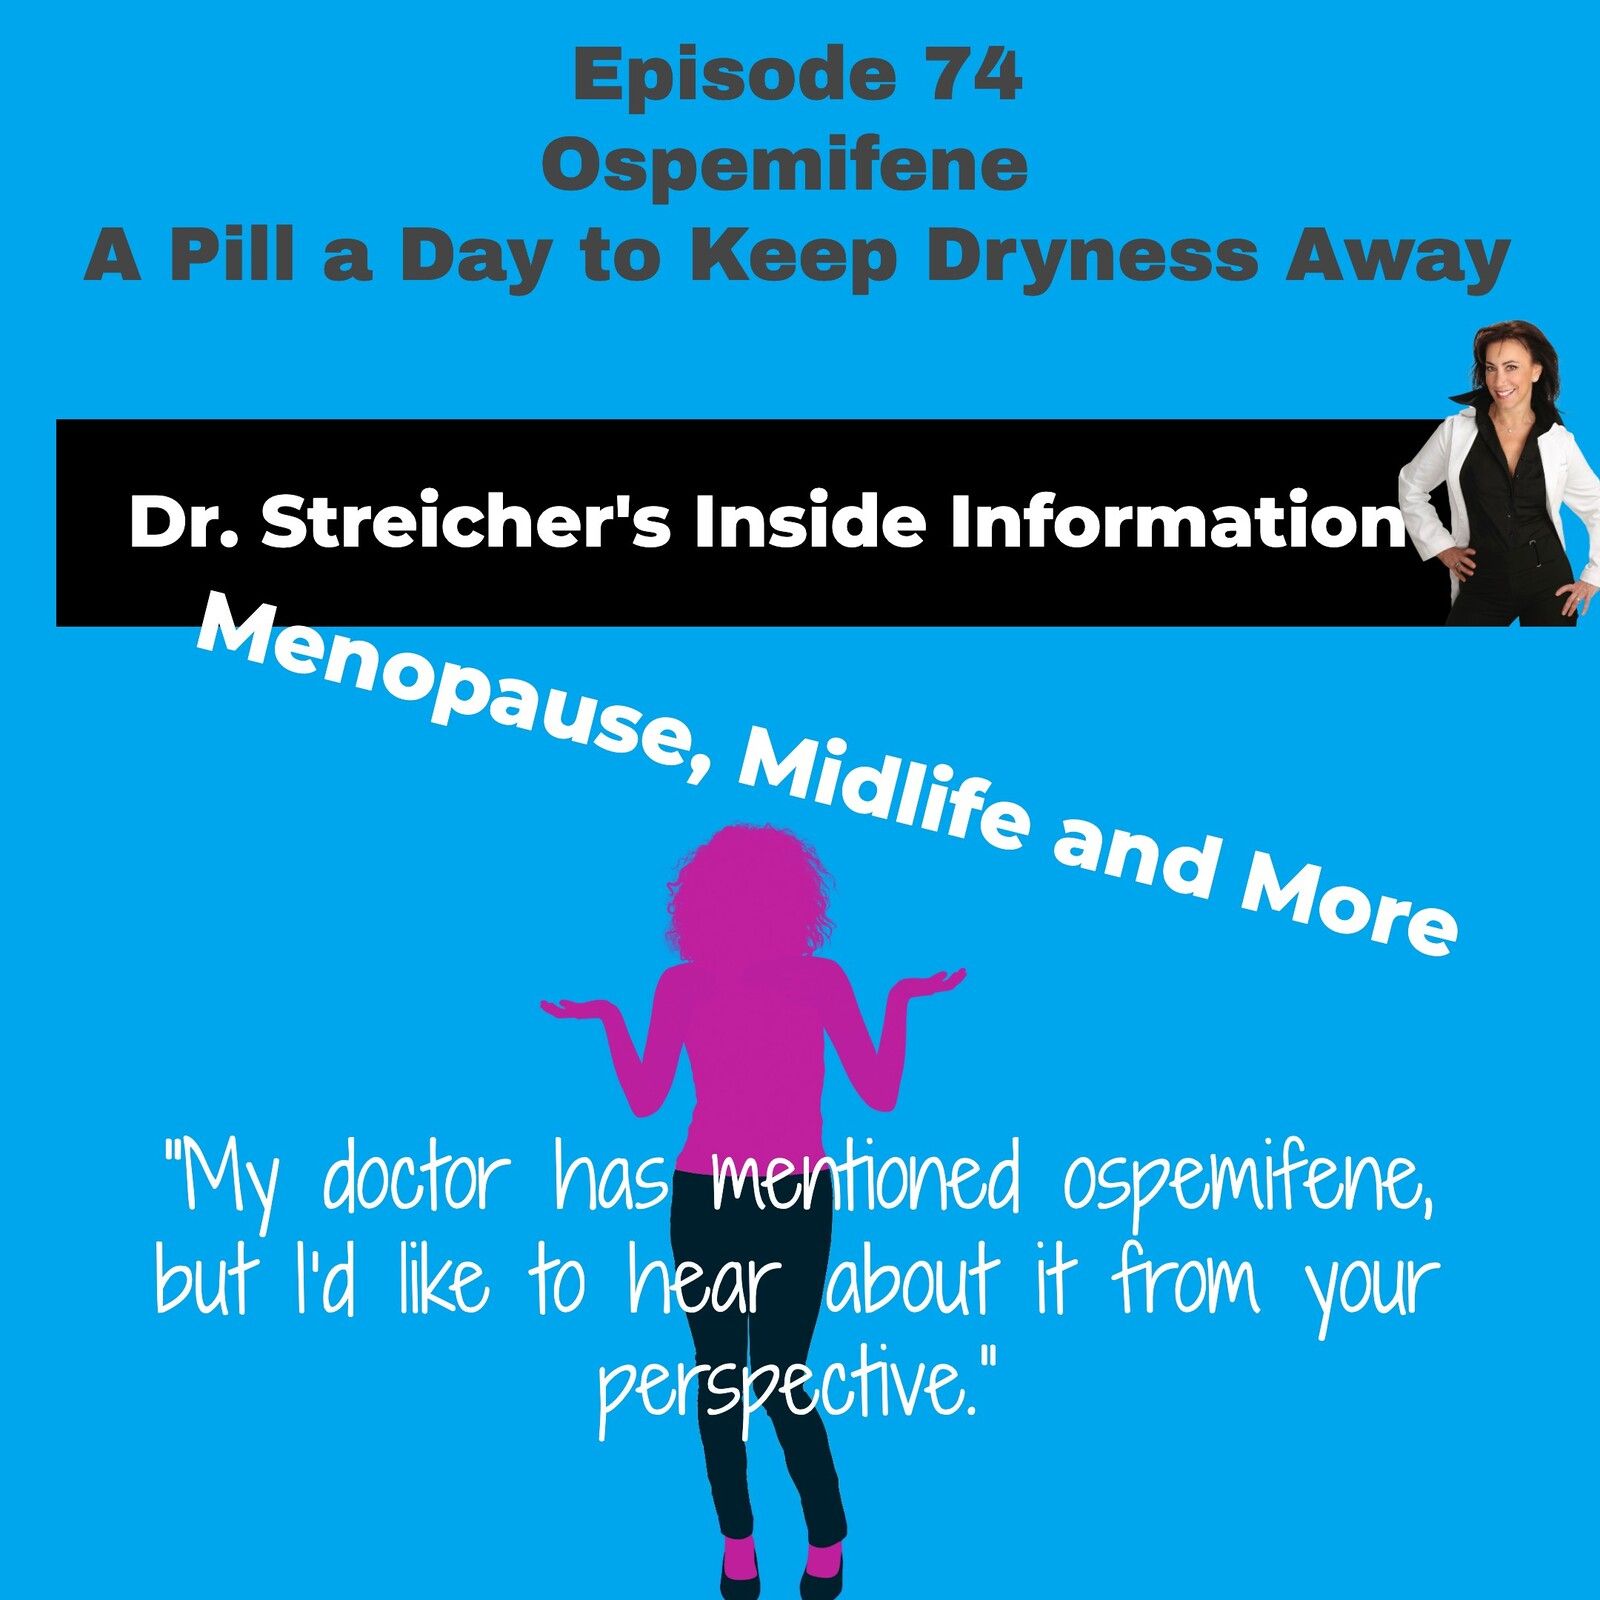 S2 Ep74: Ospemifene: A Pill a Day to Keep Dryness Away